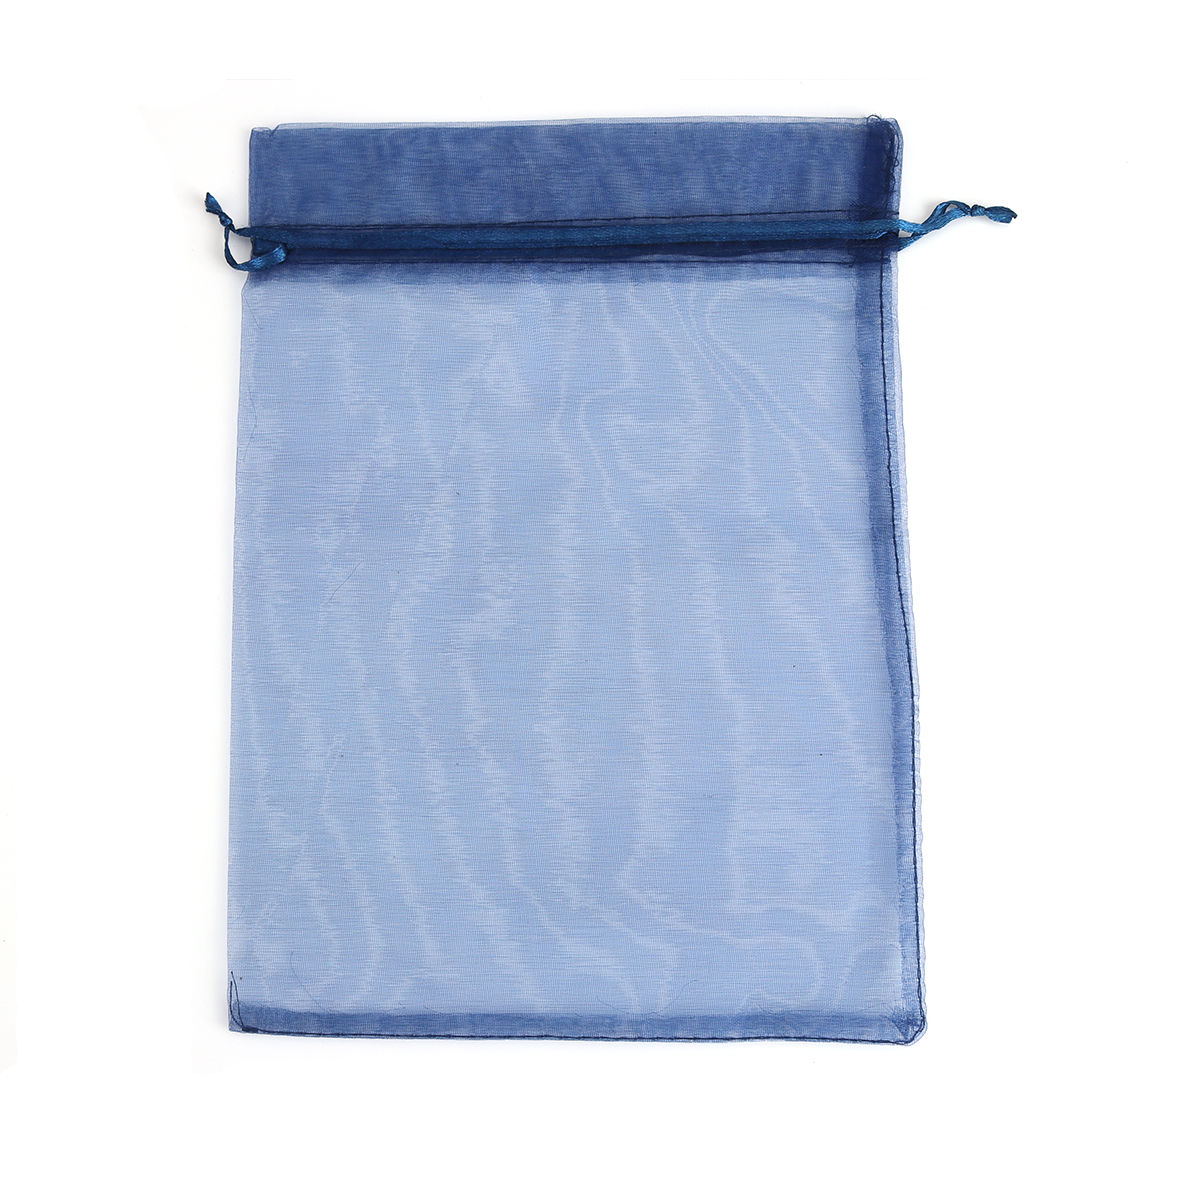 Picture of Wedding Gift Organza Jewelry Bags Drawstring Rectangle Navy Blue (Usable Space: 19x16.5cm) 23cm x 17cm, 20 PCs